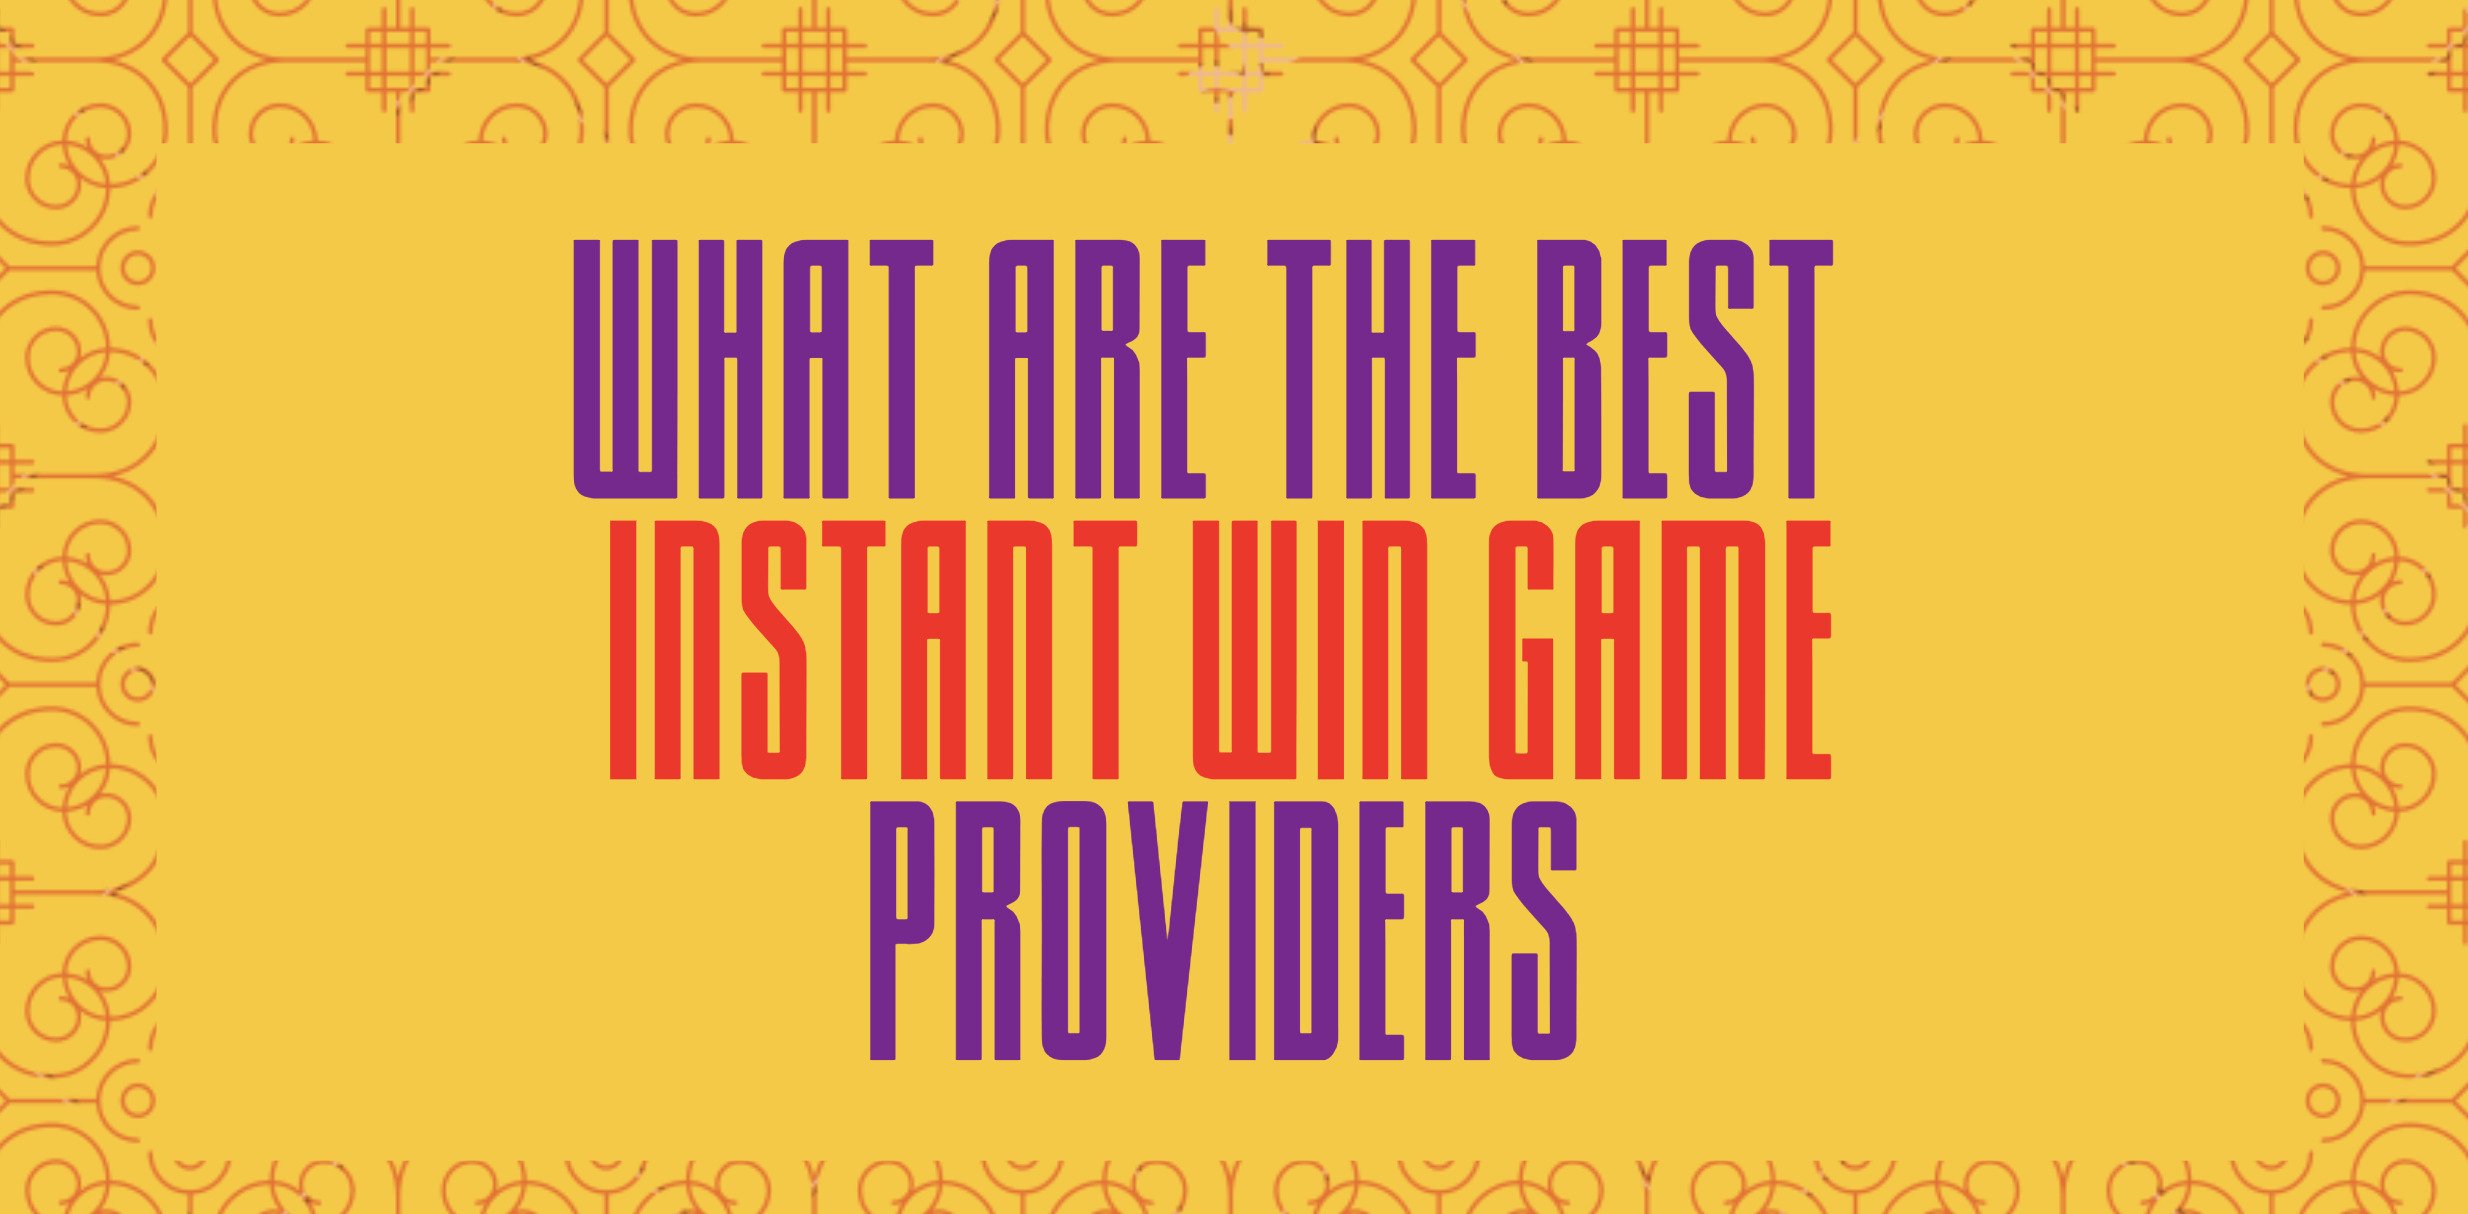 What are the Best Instant Win Game Providers